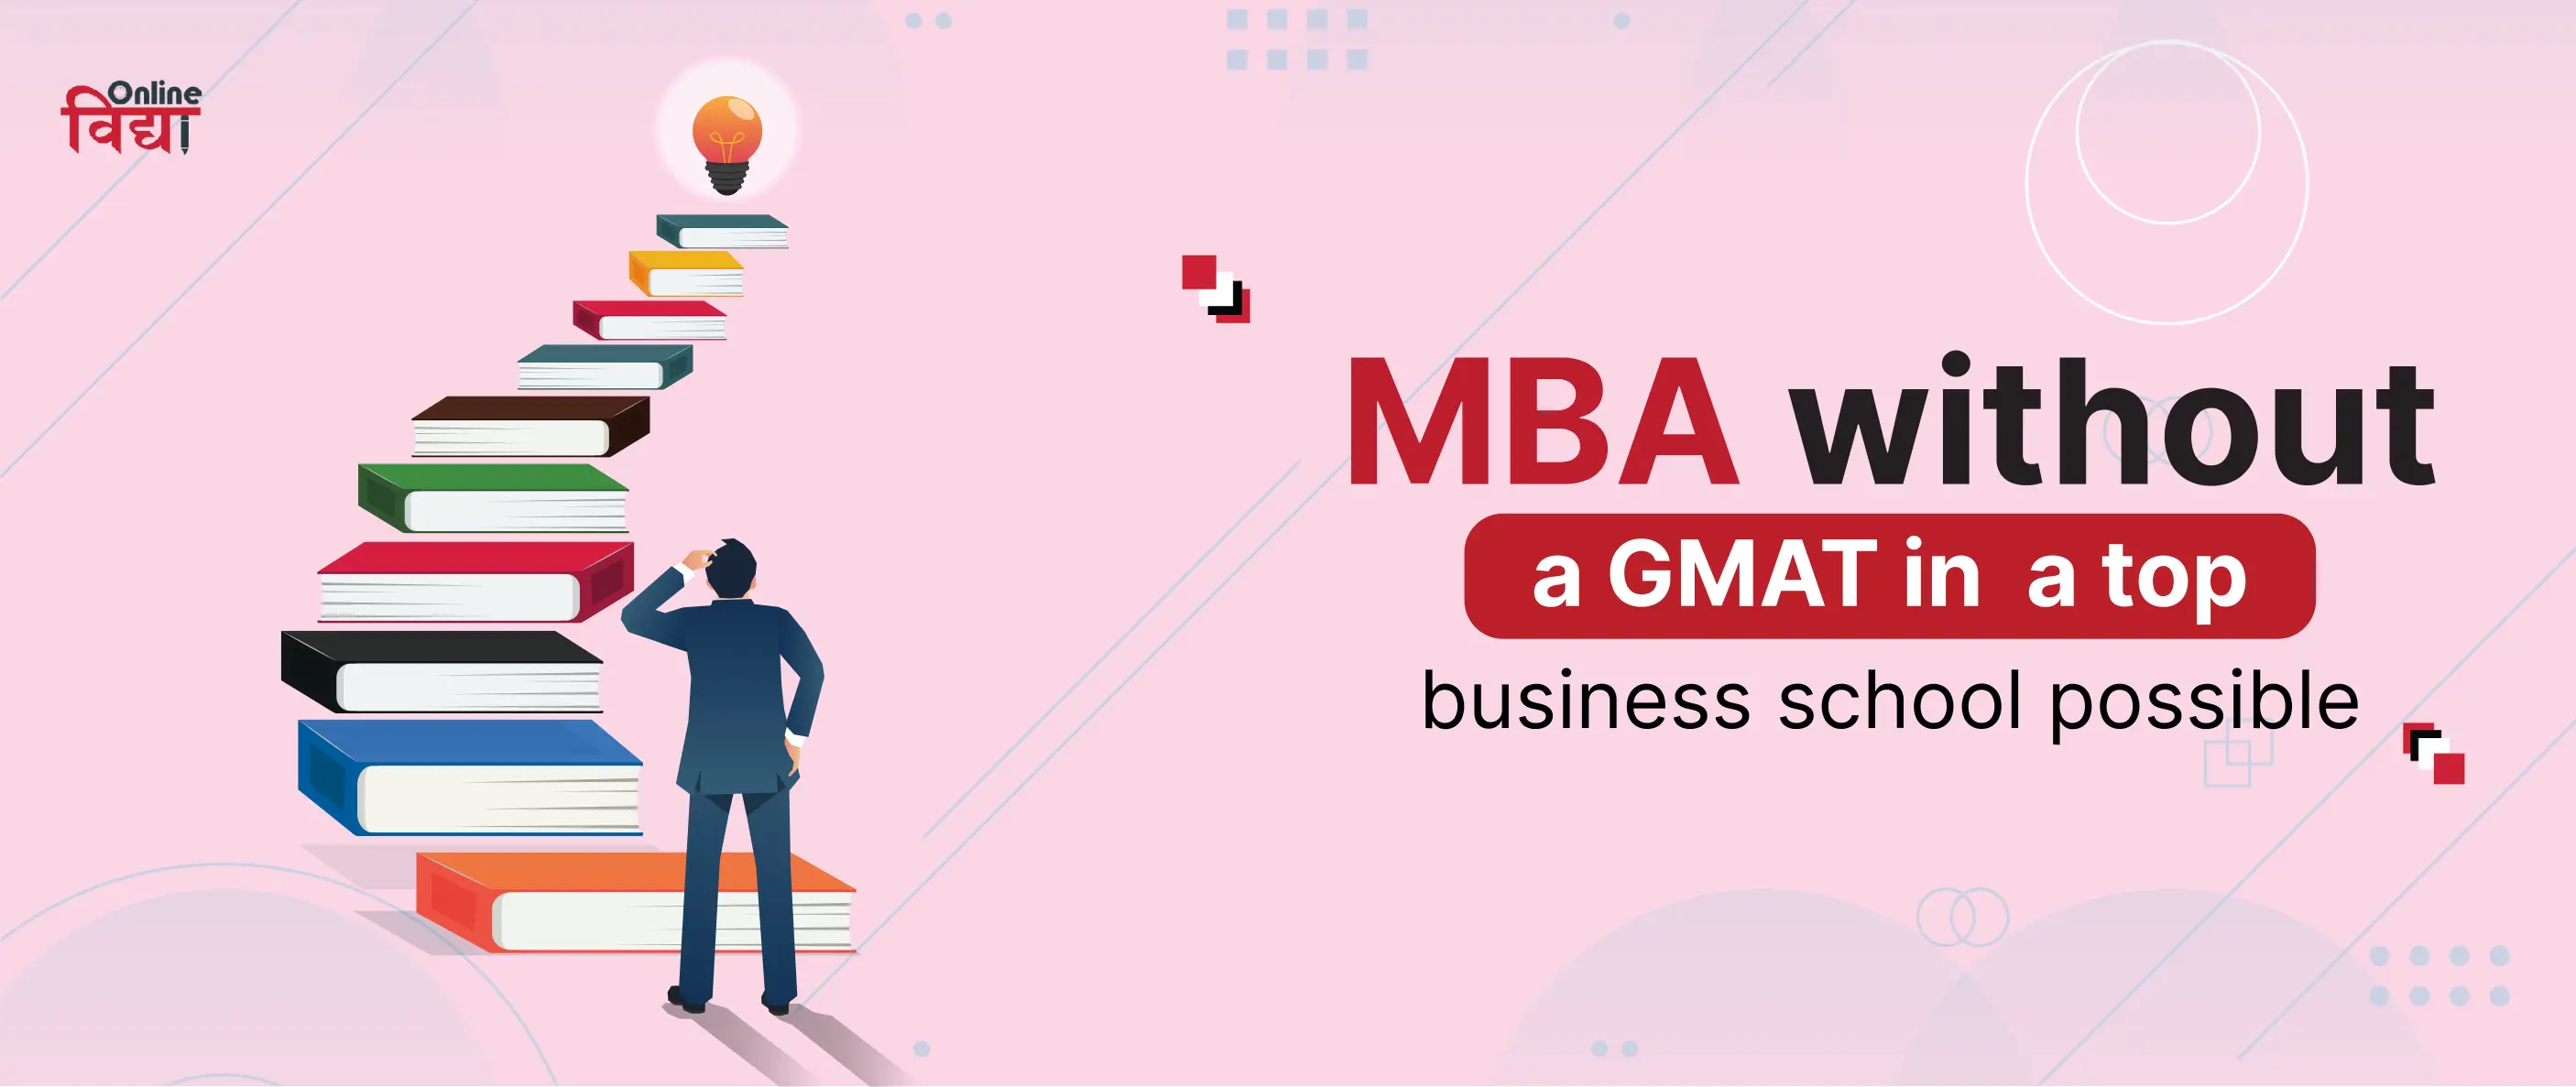 MBA without a GMAT in a top business school possible?